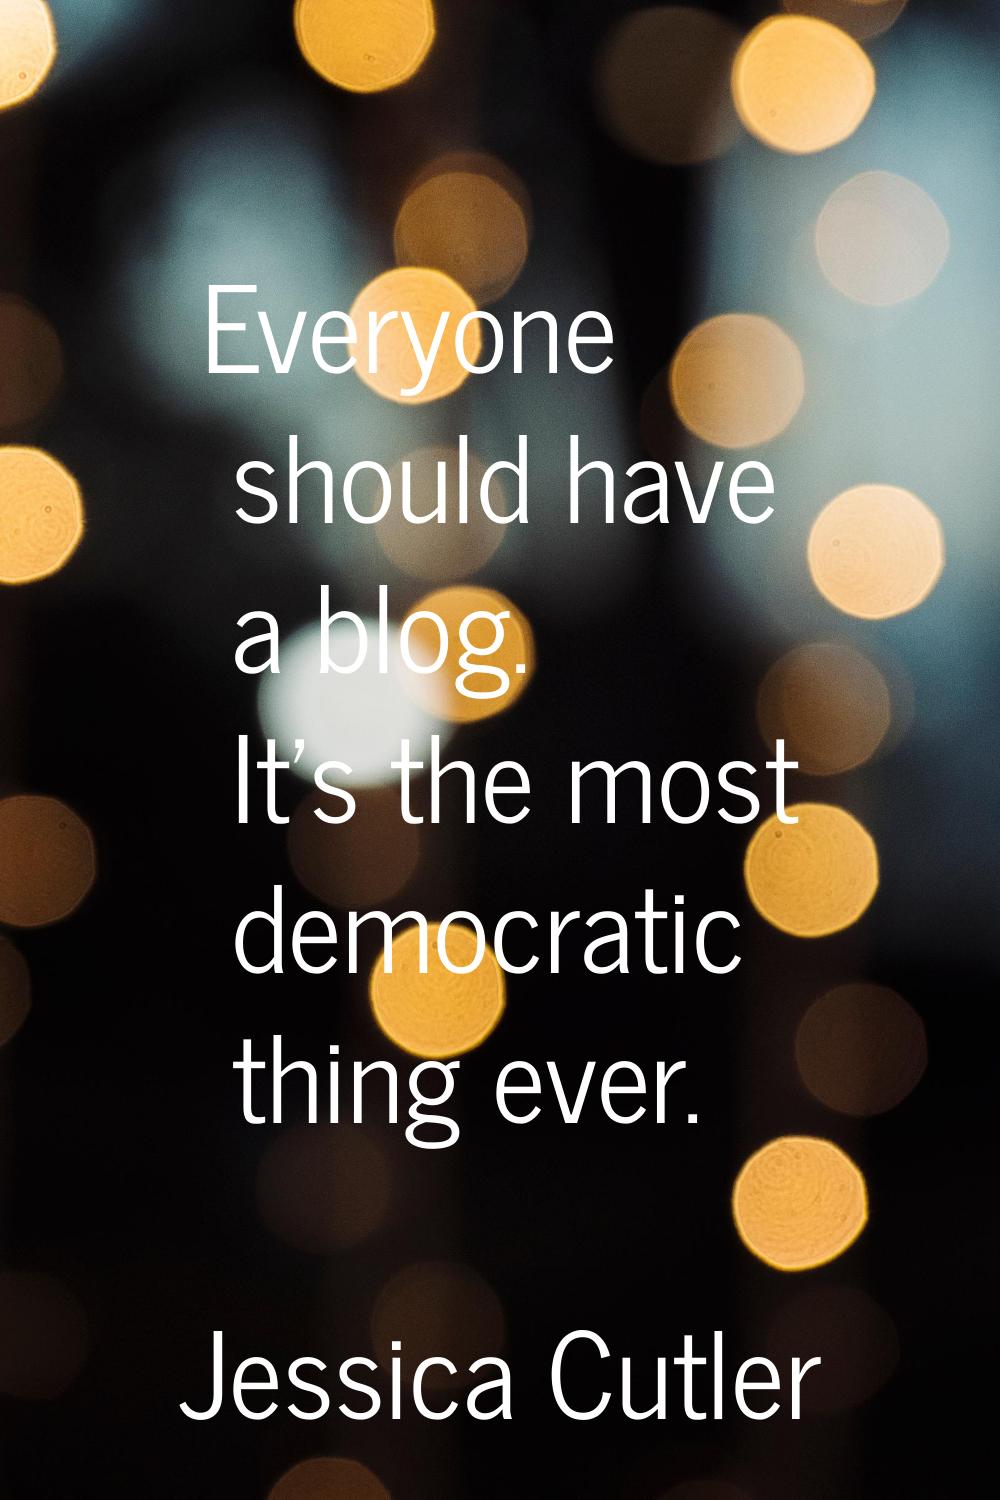 Everyone should have a blog. It's the most democratic thing ever.